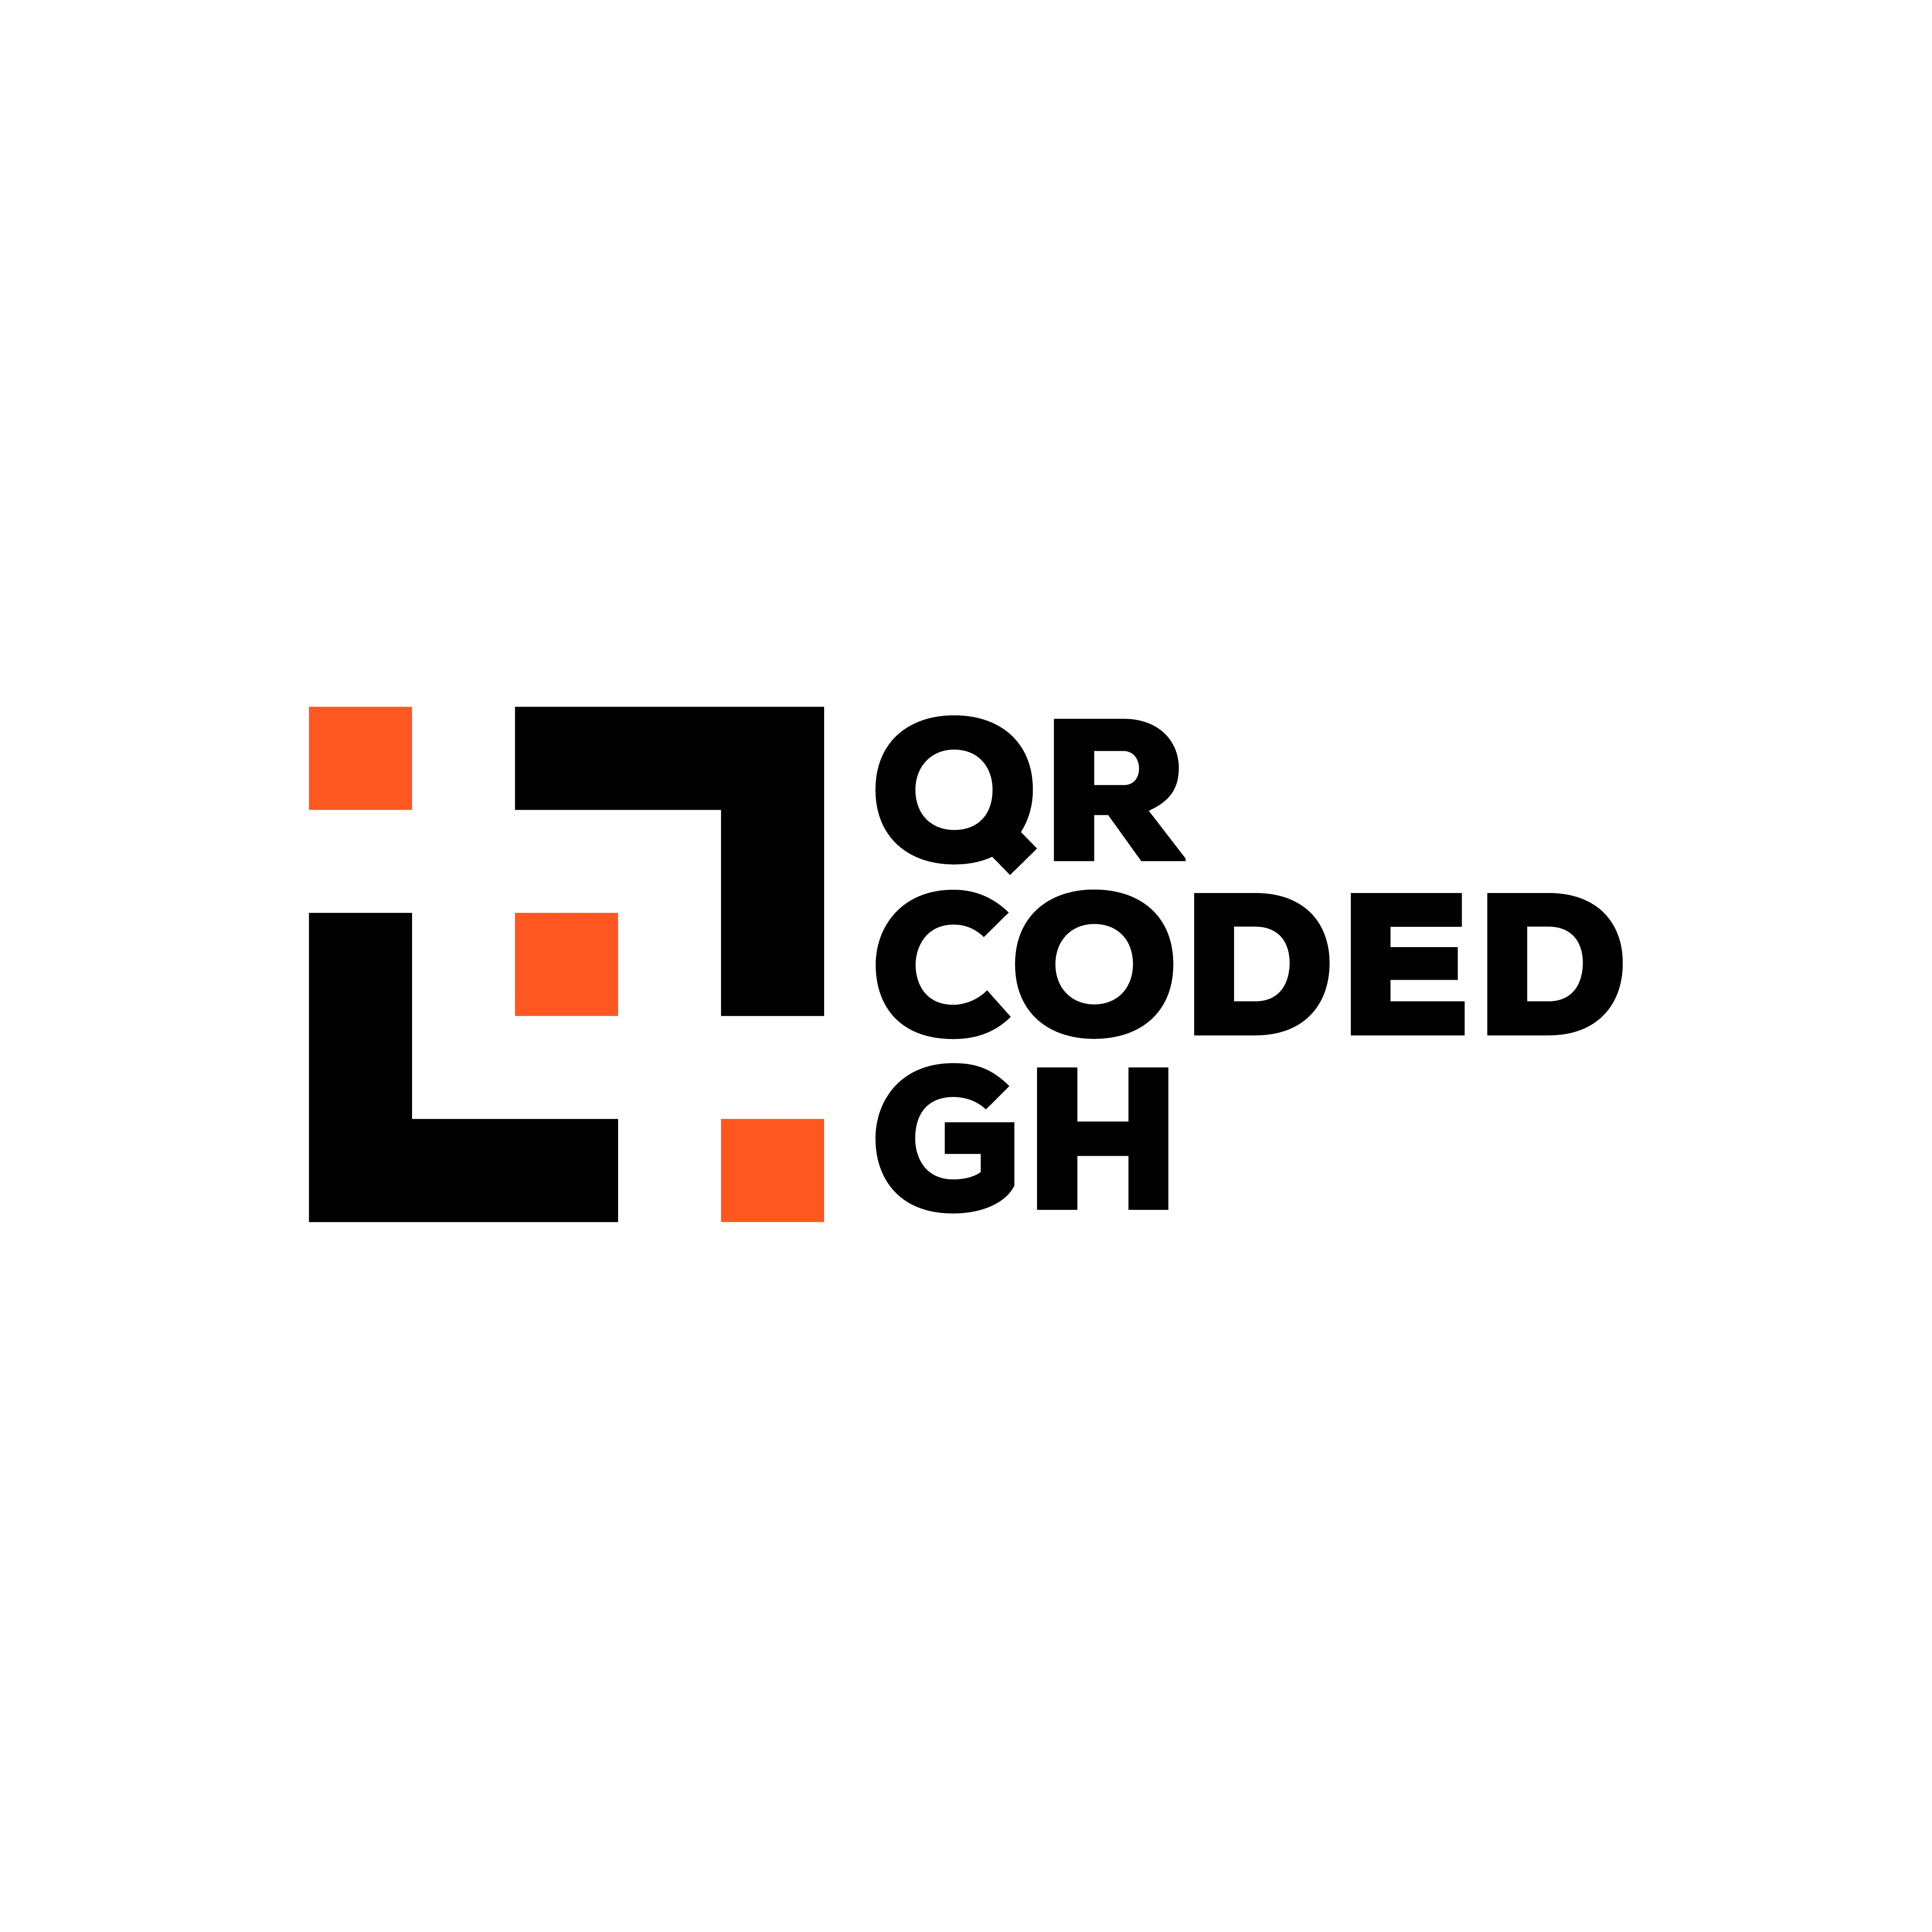 QRCODED official logo